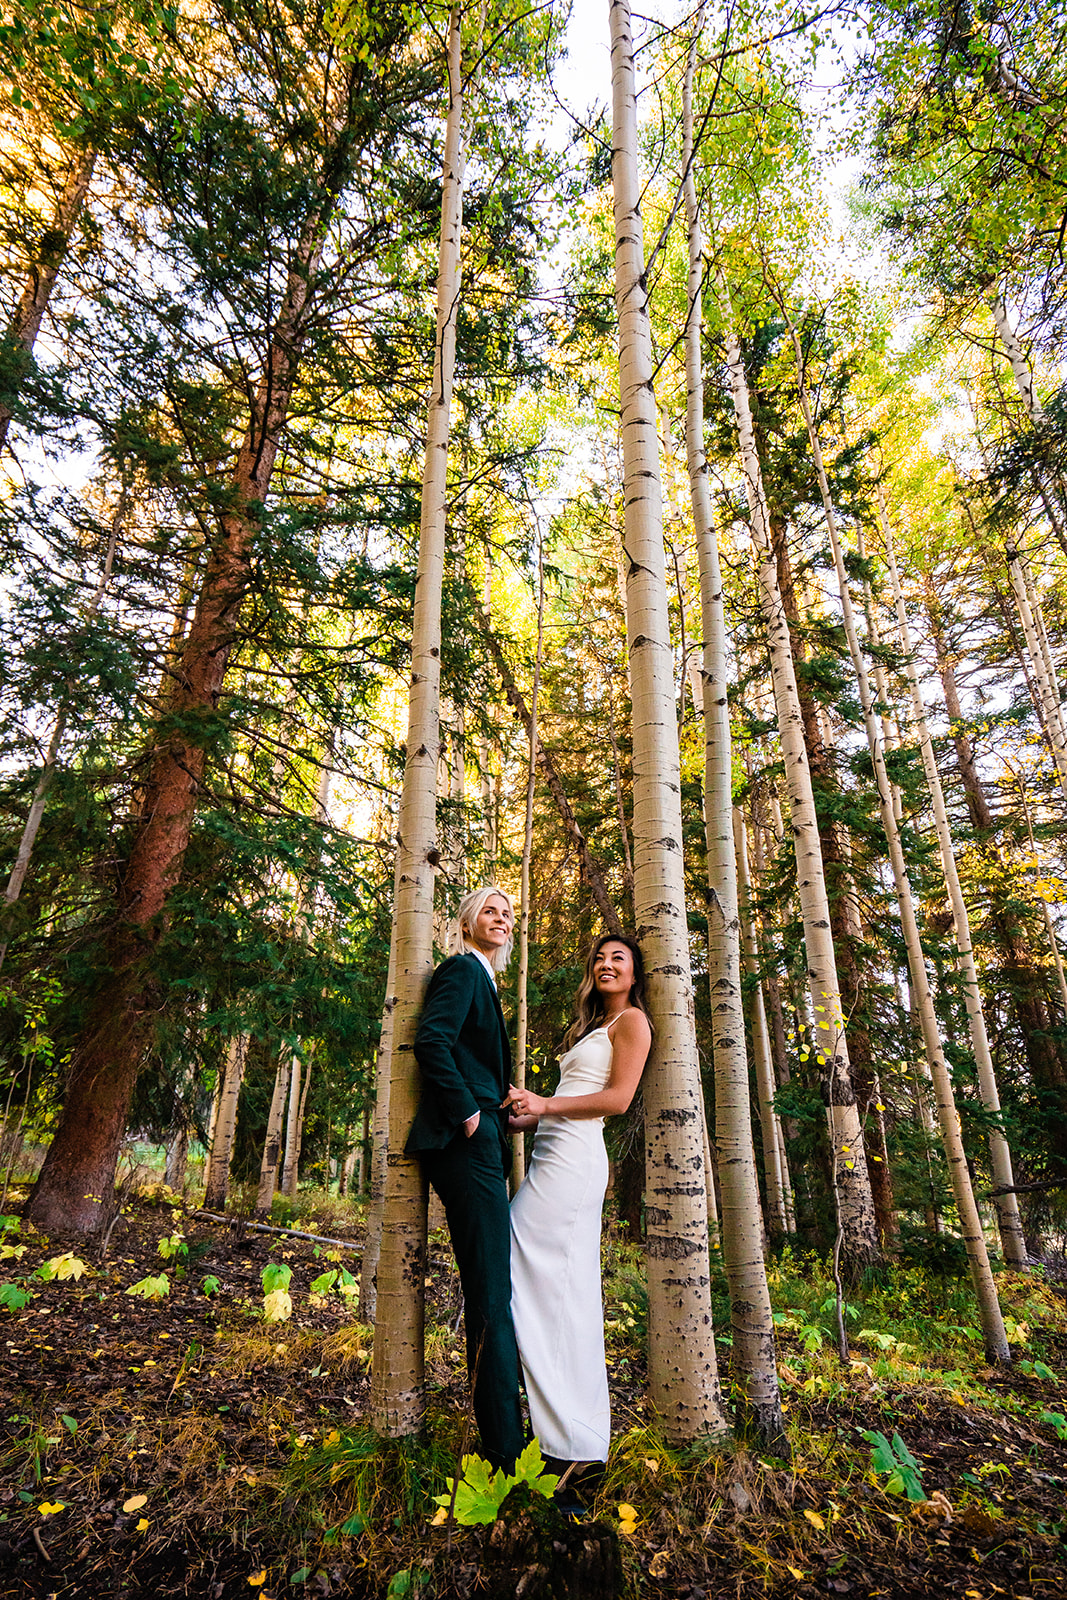 Adventurous Lesbian Elopement at Crested Butte in the mountains surrounded by towering trees